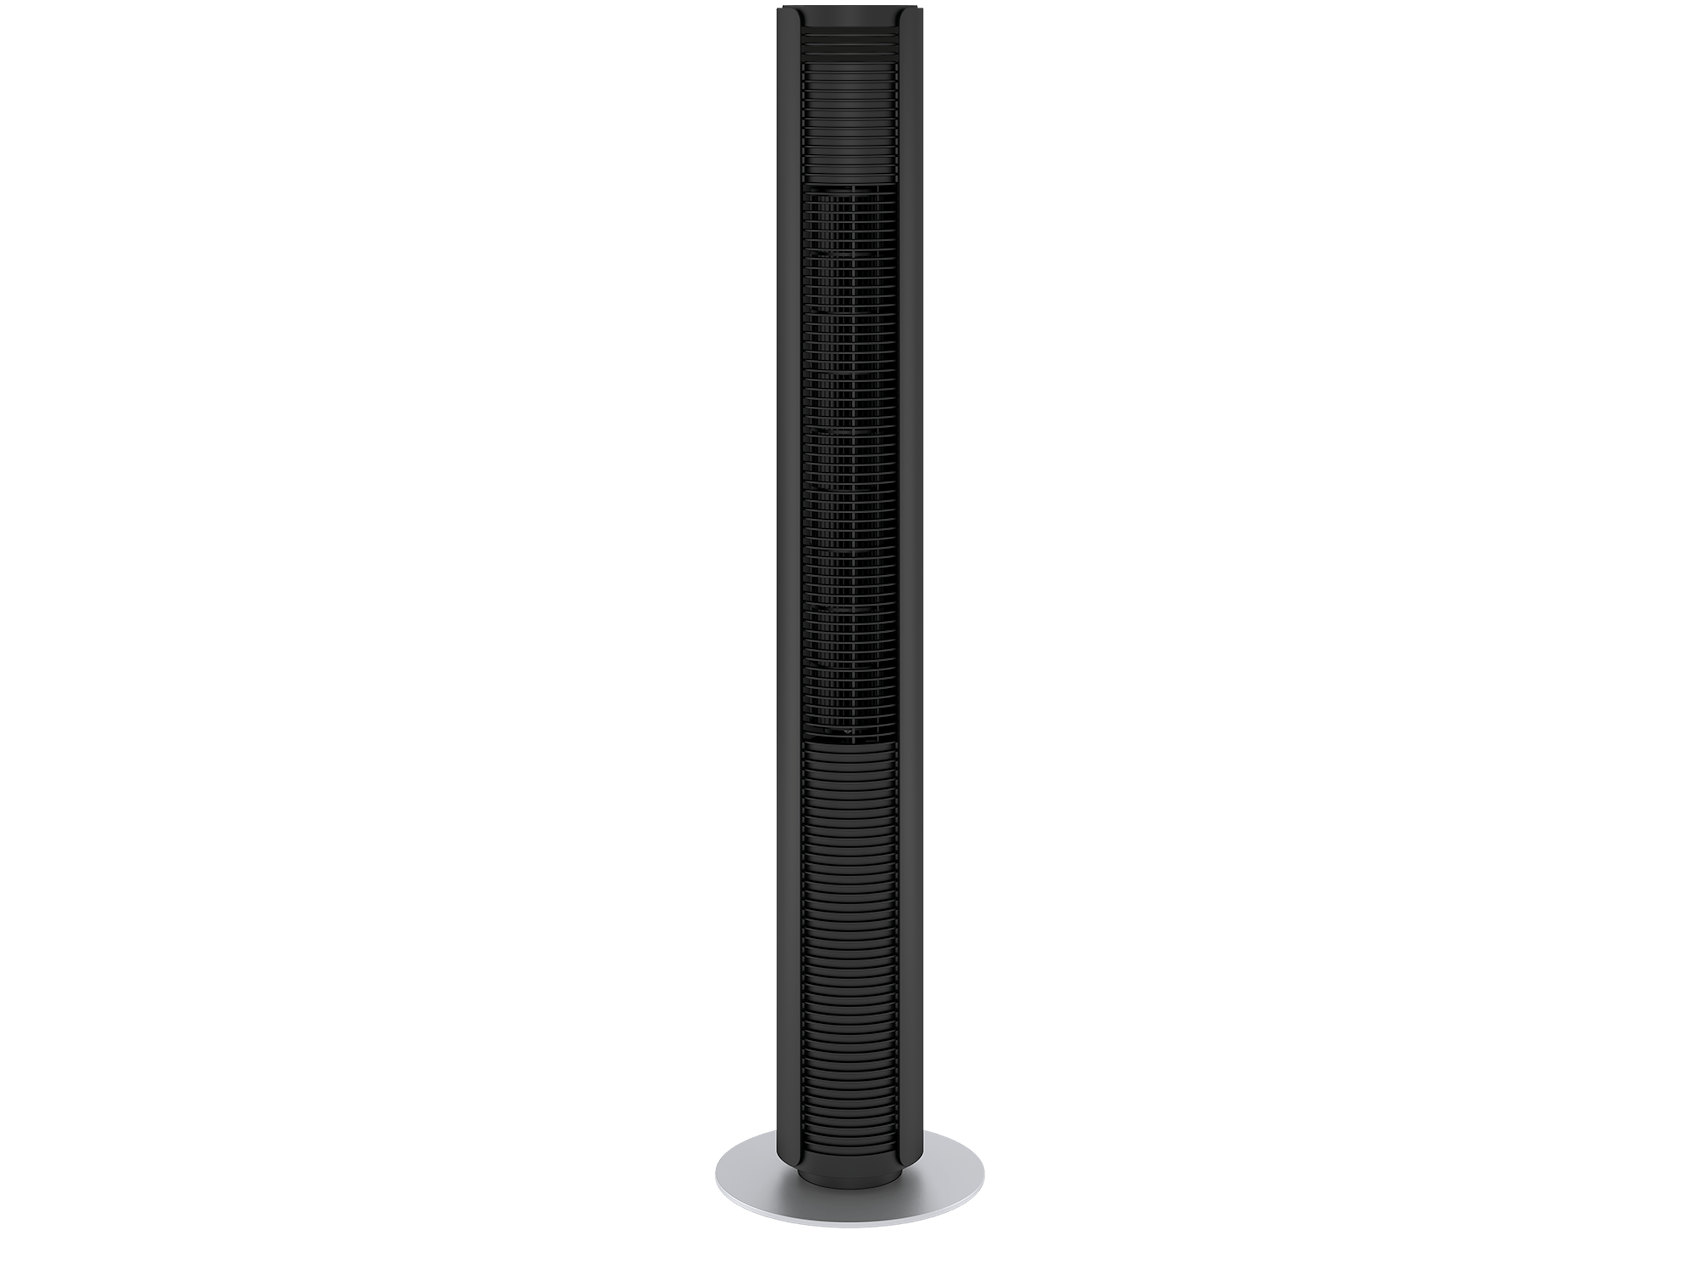 Peter tower fan by Stadler Form in black as front view